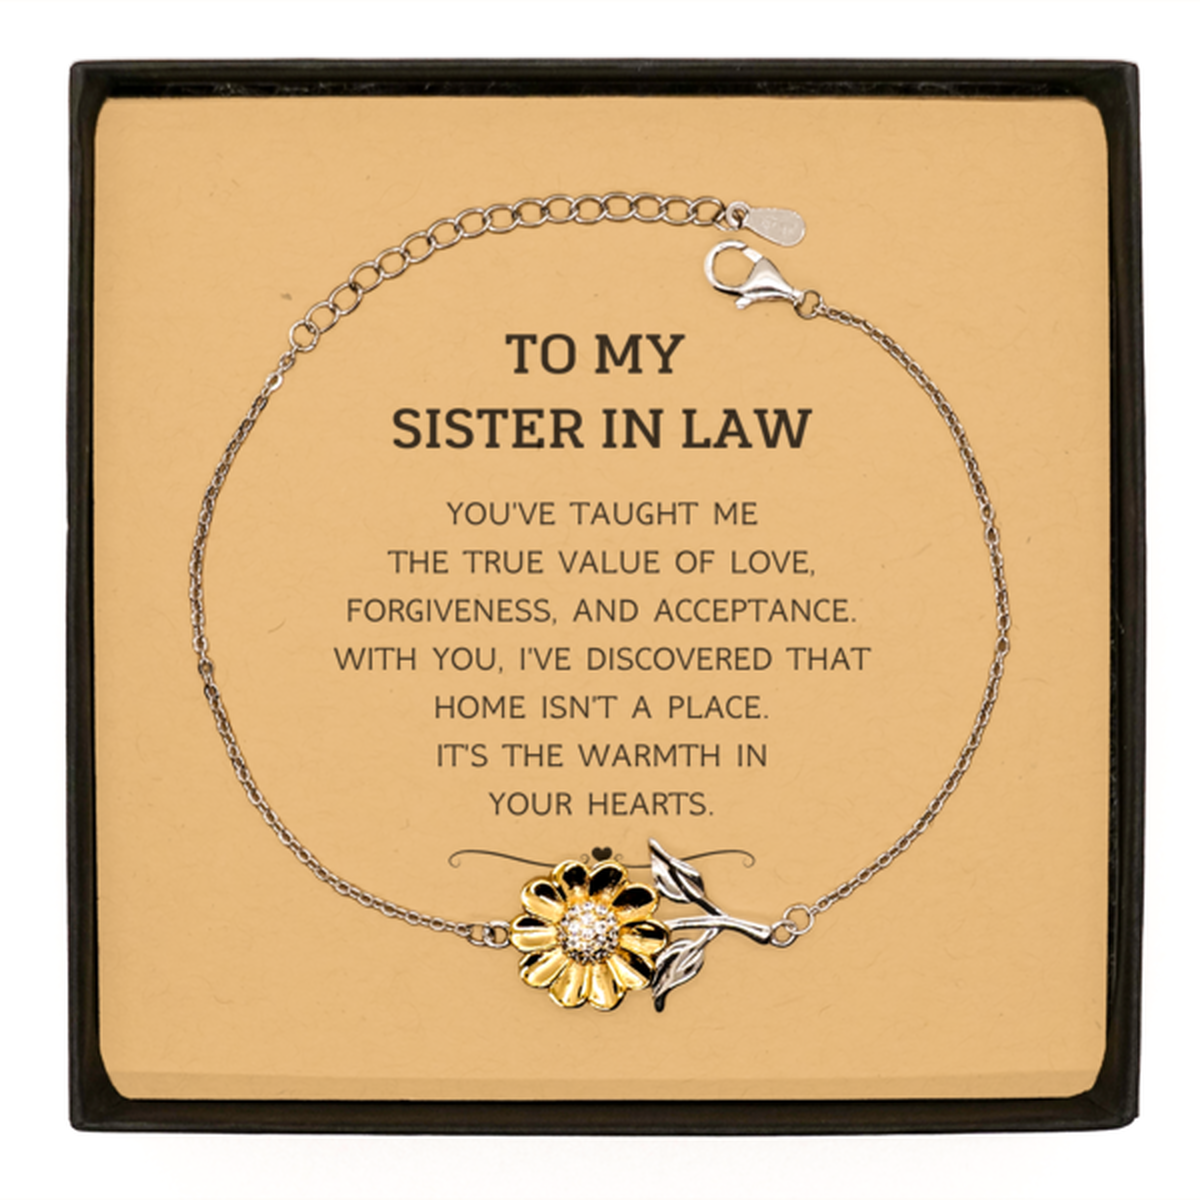 To My Sister In Law Gifts, You've taught me the true value of love, Thank You Gifts For Sister In Law, Birthday Sunflower Bracelet For Sister In Law